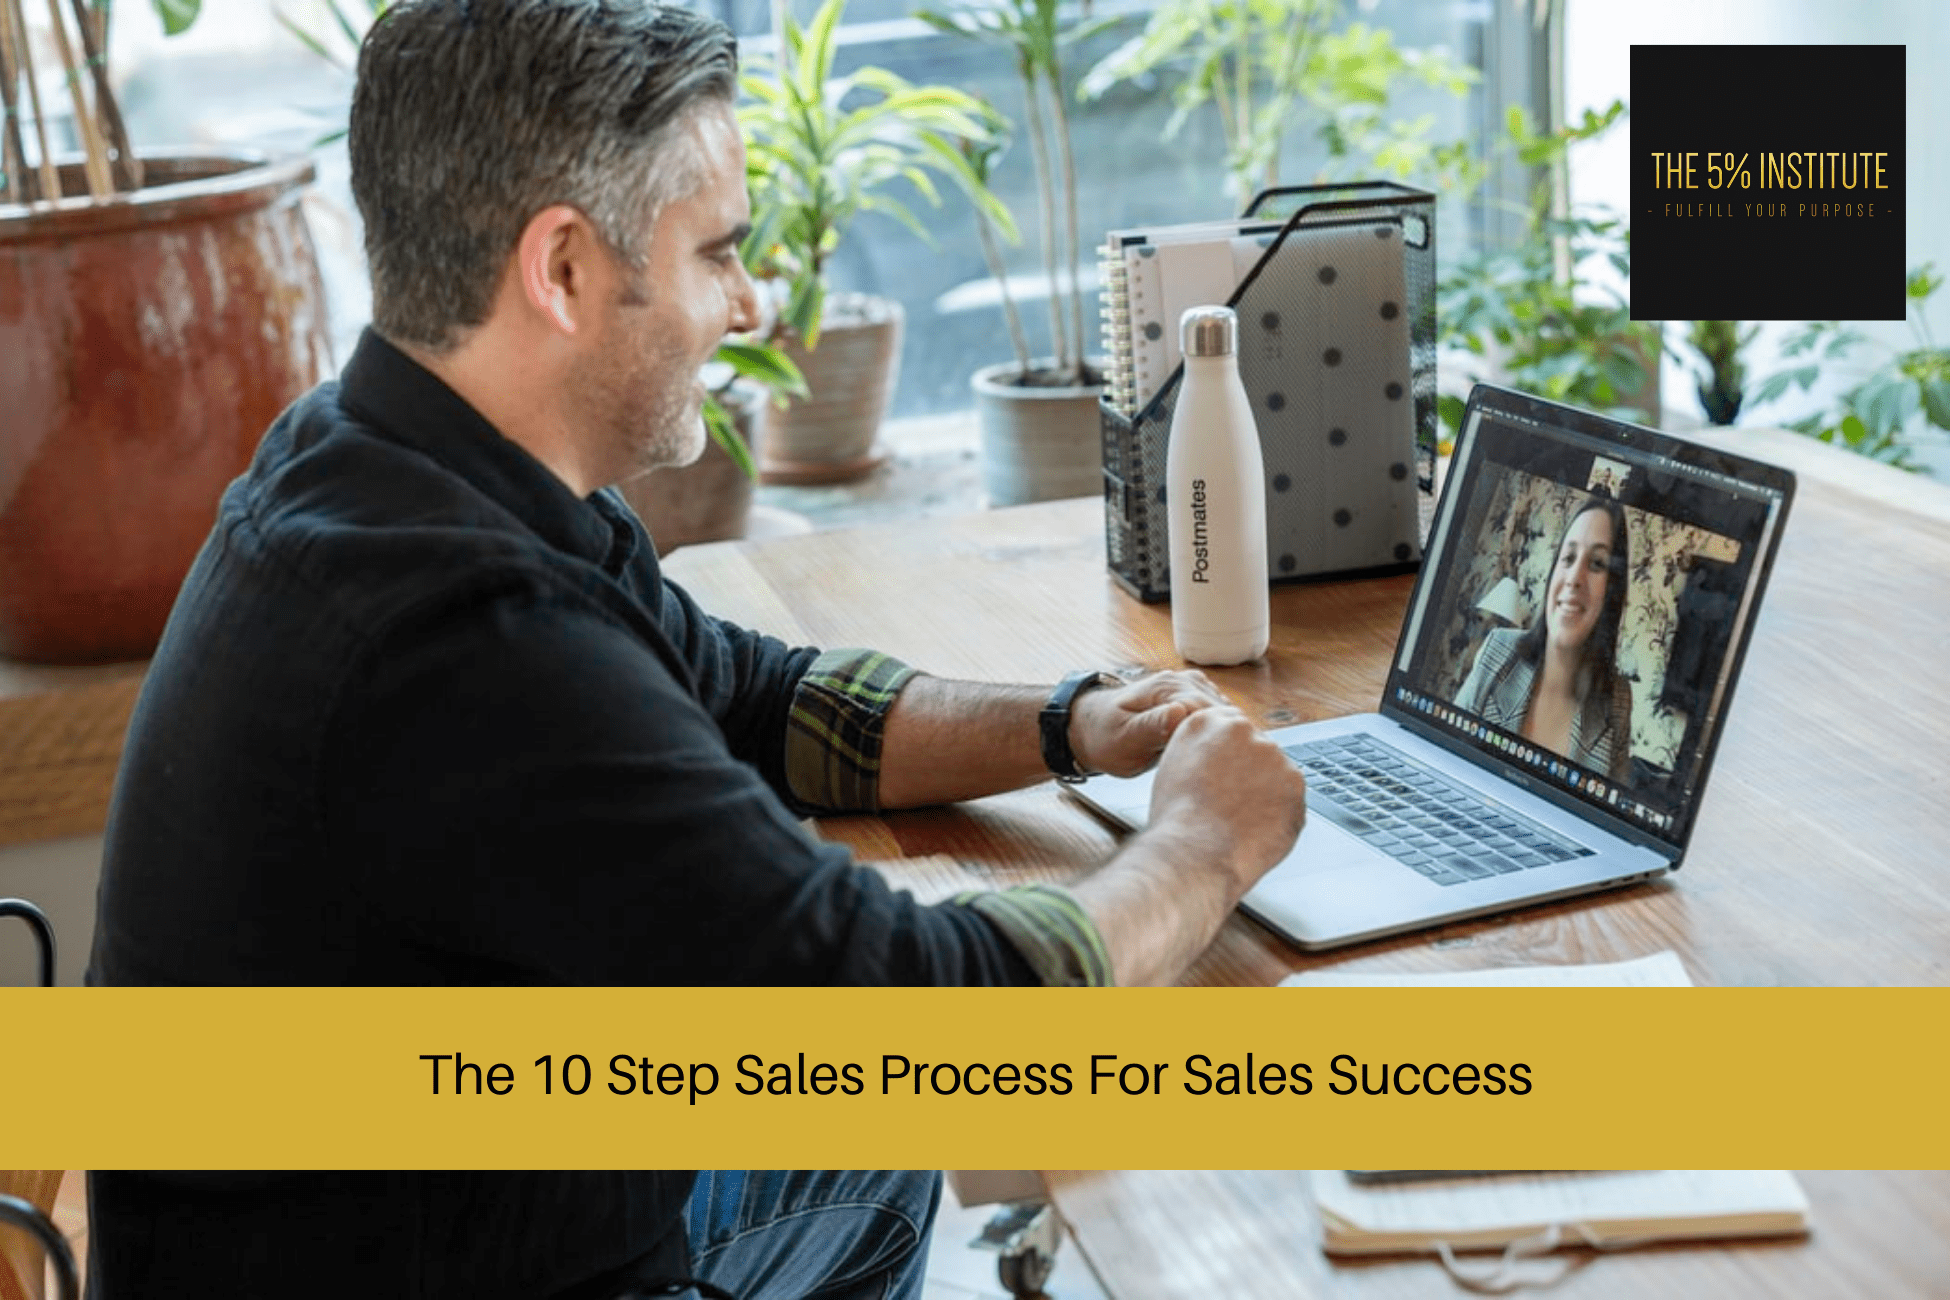 The 10 Step Sales Process For Sales Success - The 5% Institute